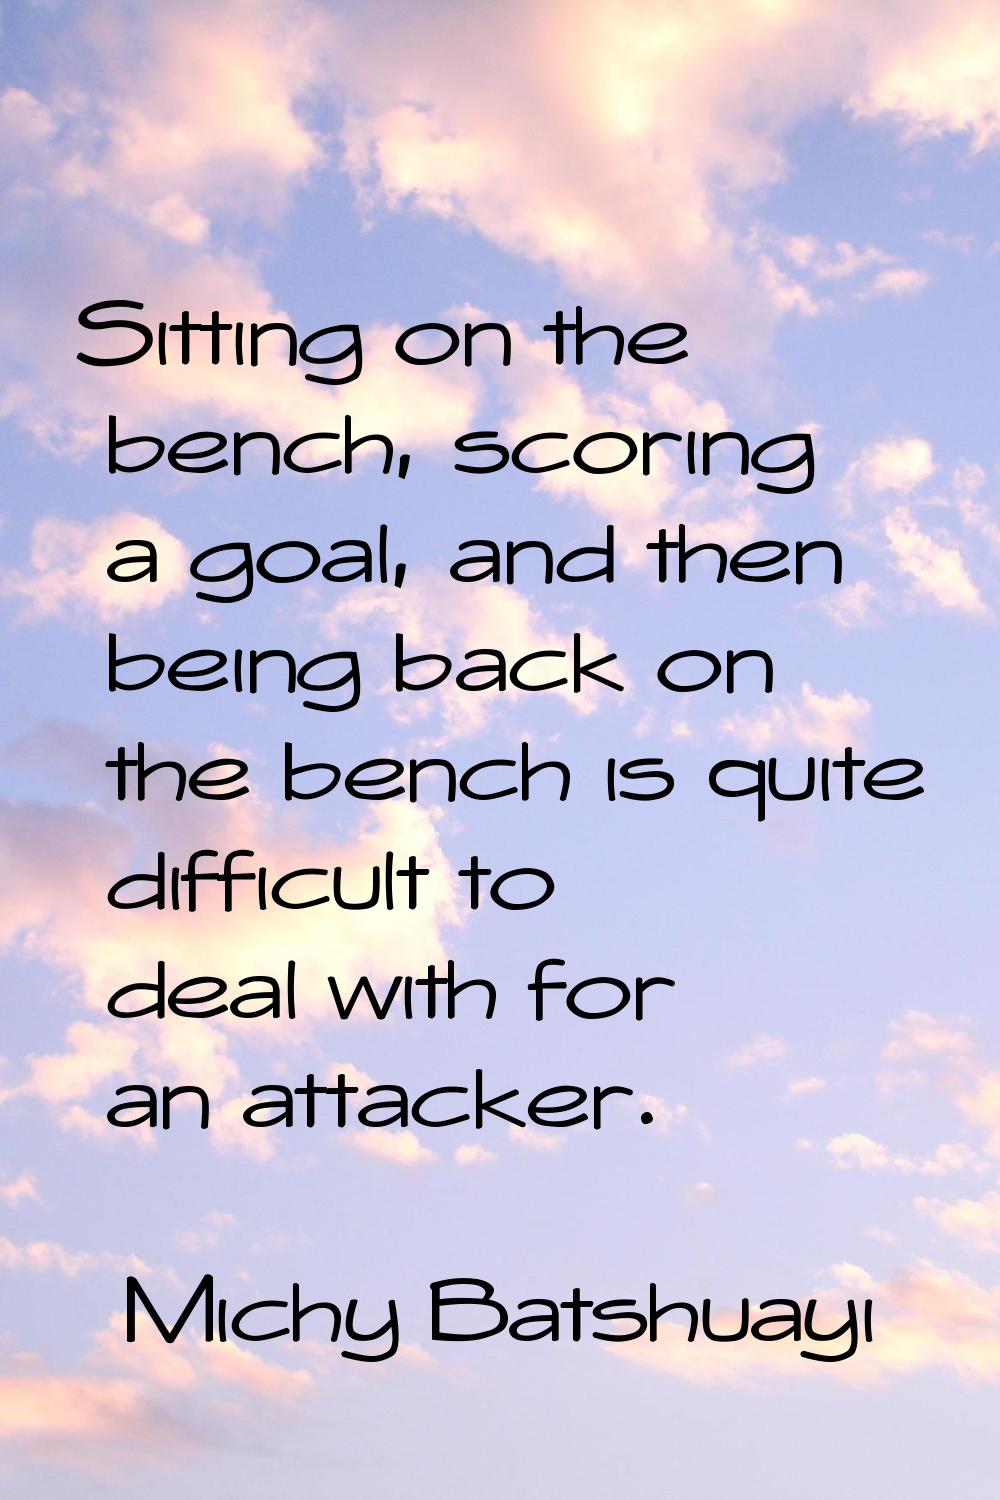 Sitting on the bench, scoring a goal, and then being back on the bench is quite difficult to deal w